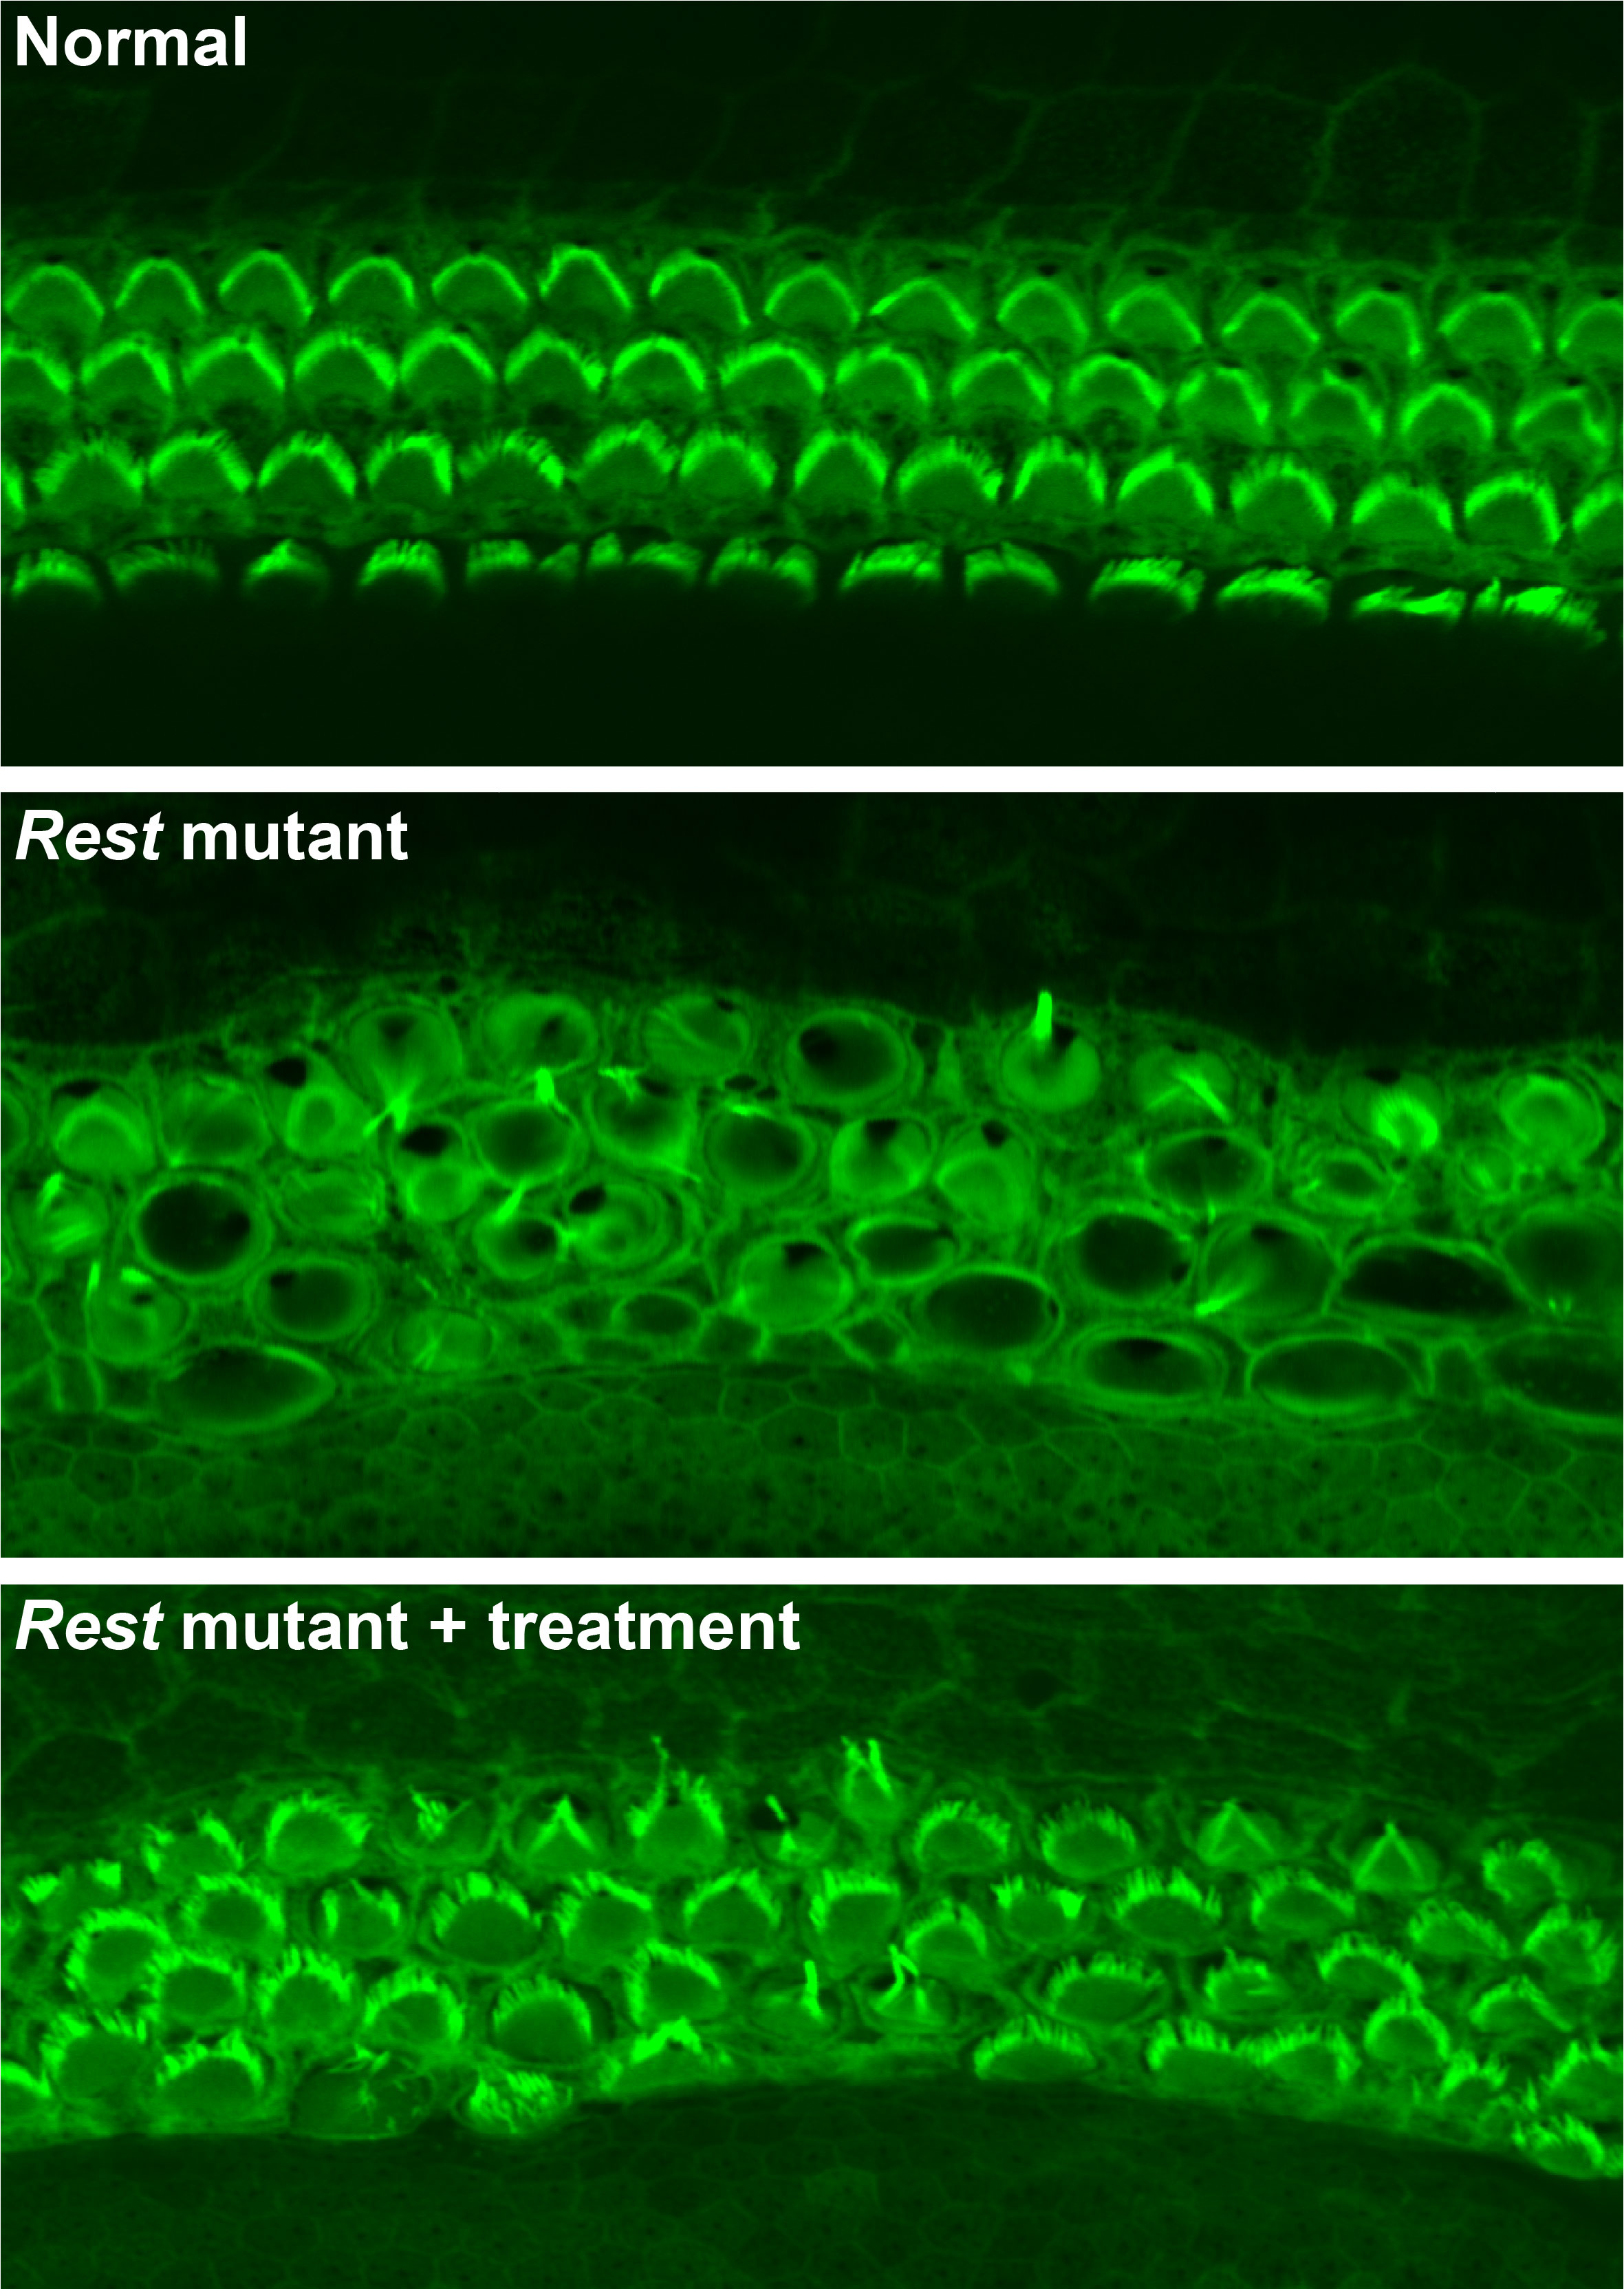 Top: Healthy hair cells depicted by rows of green arcs. Middle: Jumbled cells with no visible green arcs. Bottom: Rest mutant plus treatment—green arcs visible, but less organized than in non-mutated.